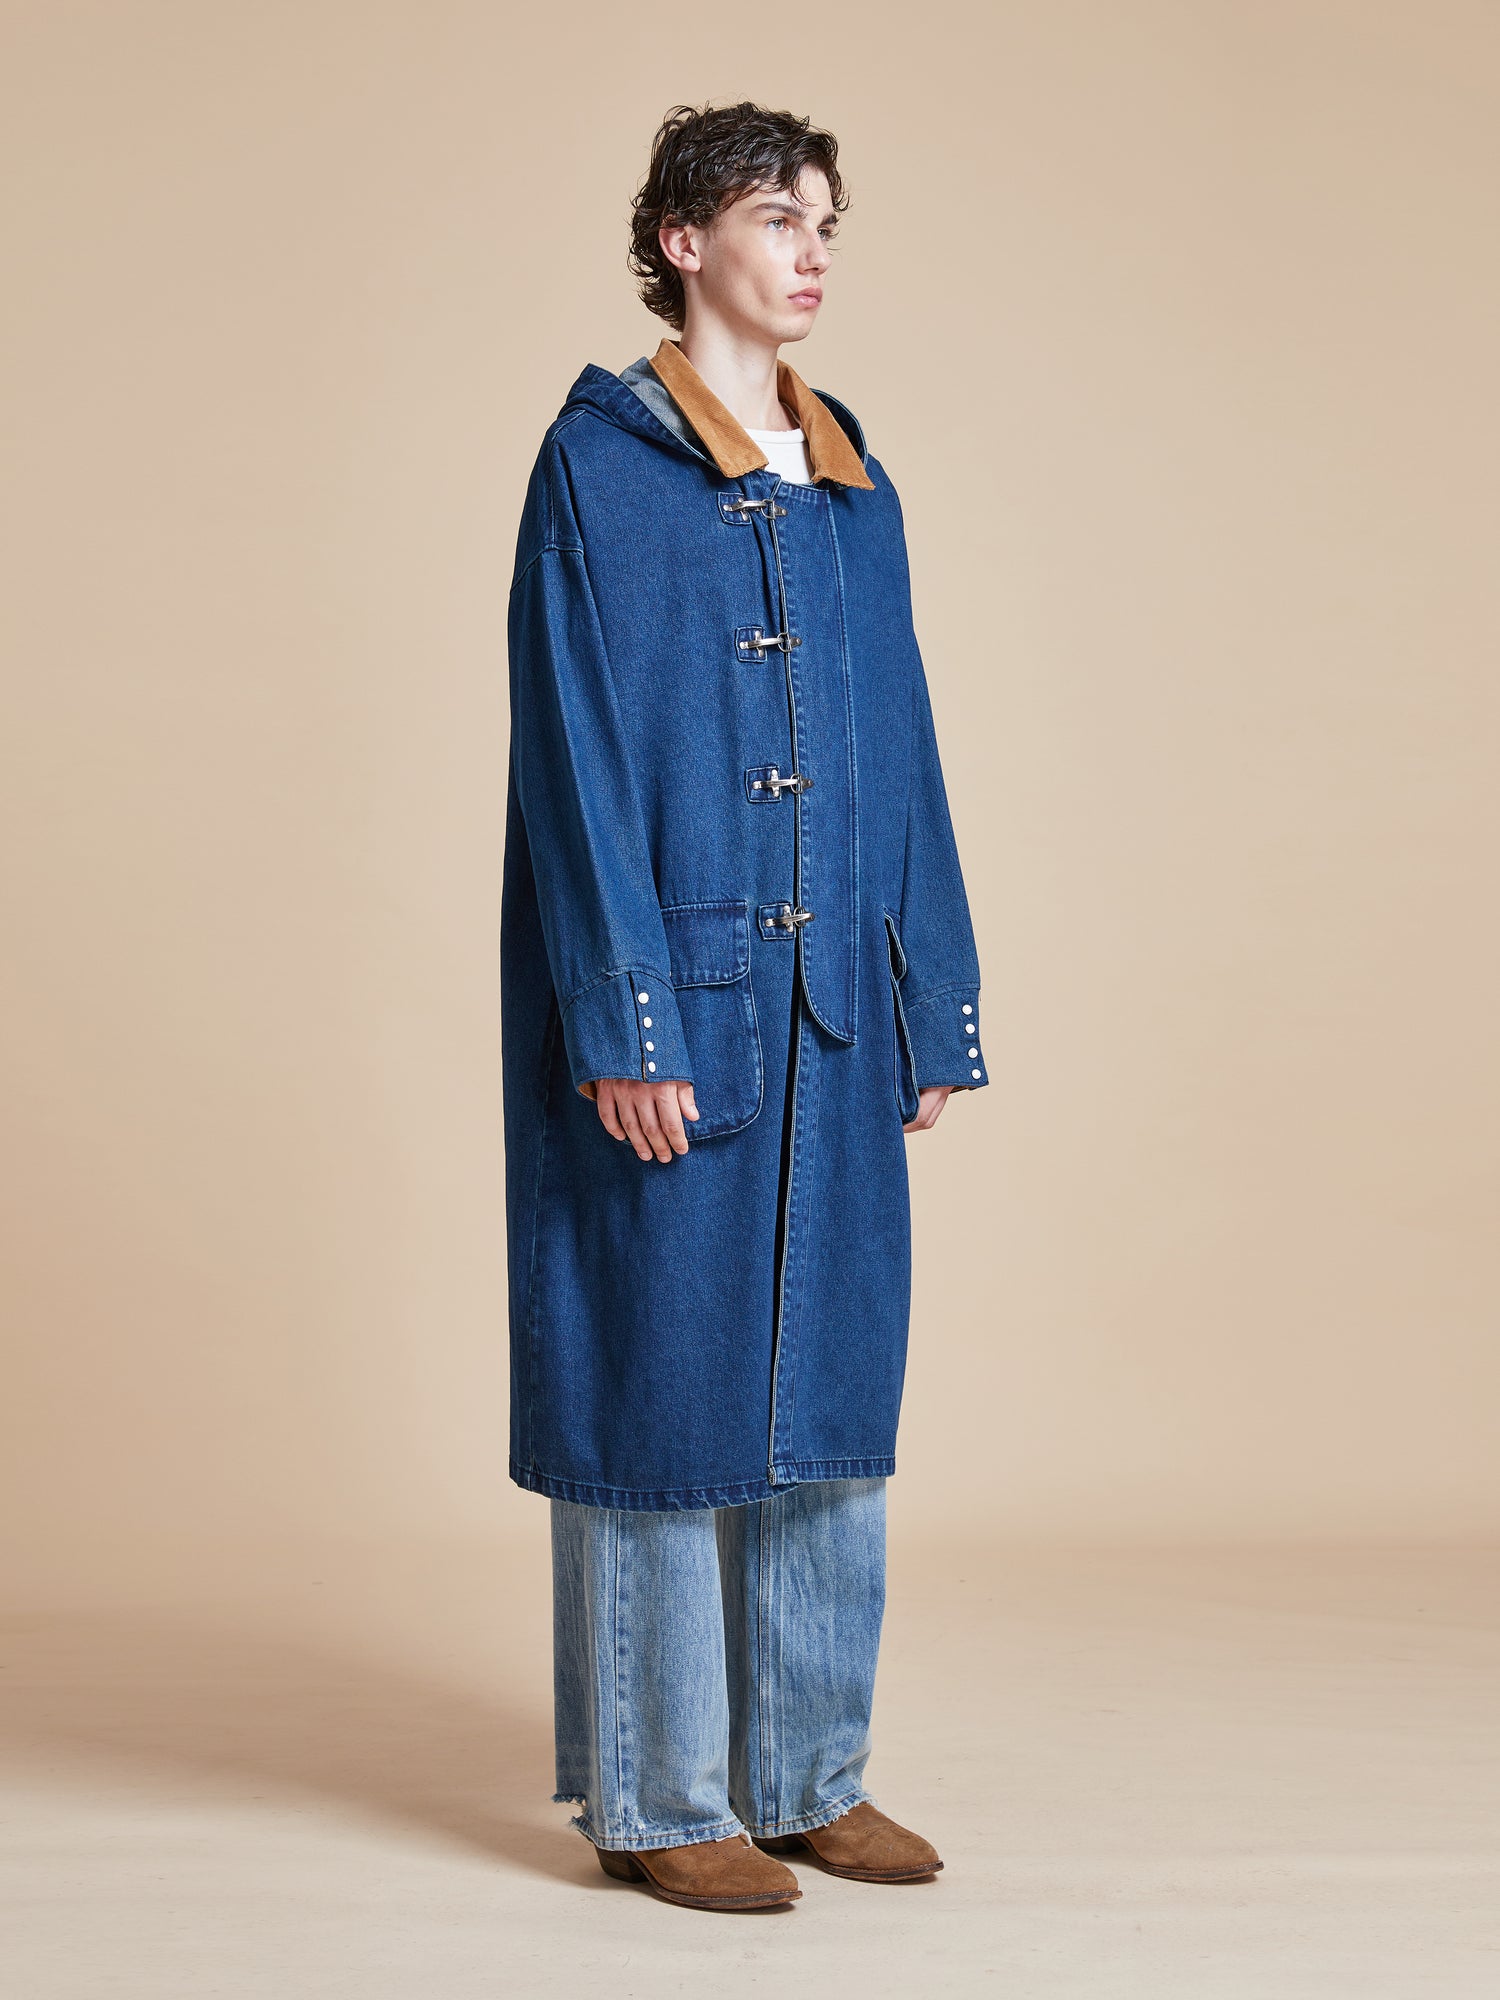 A model wearing a Sargasso Denim Buckle Coat and jeans by Found.